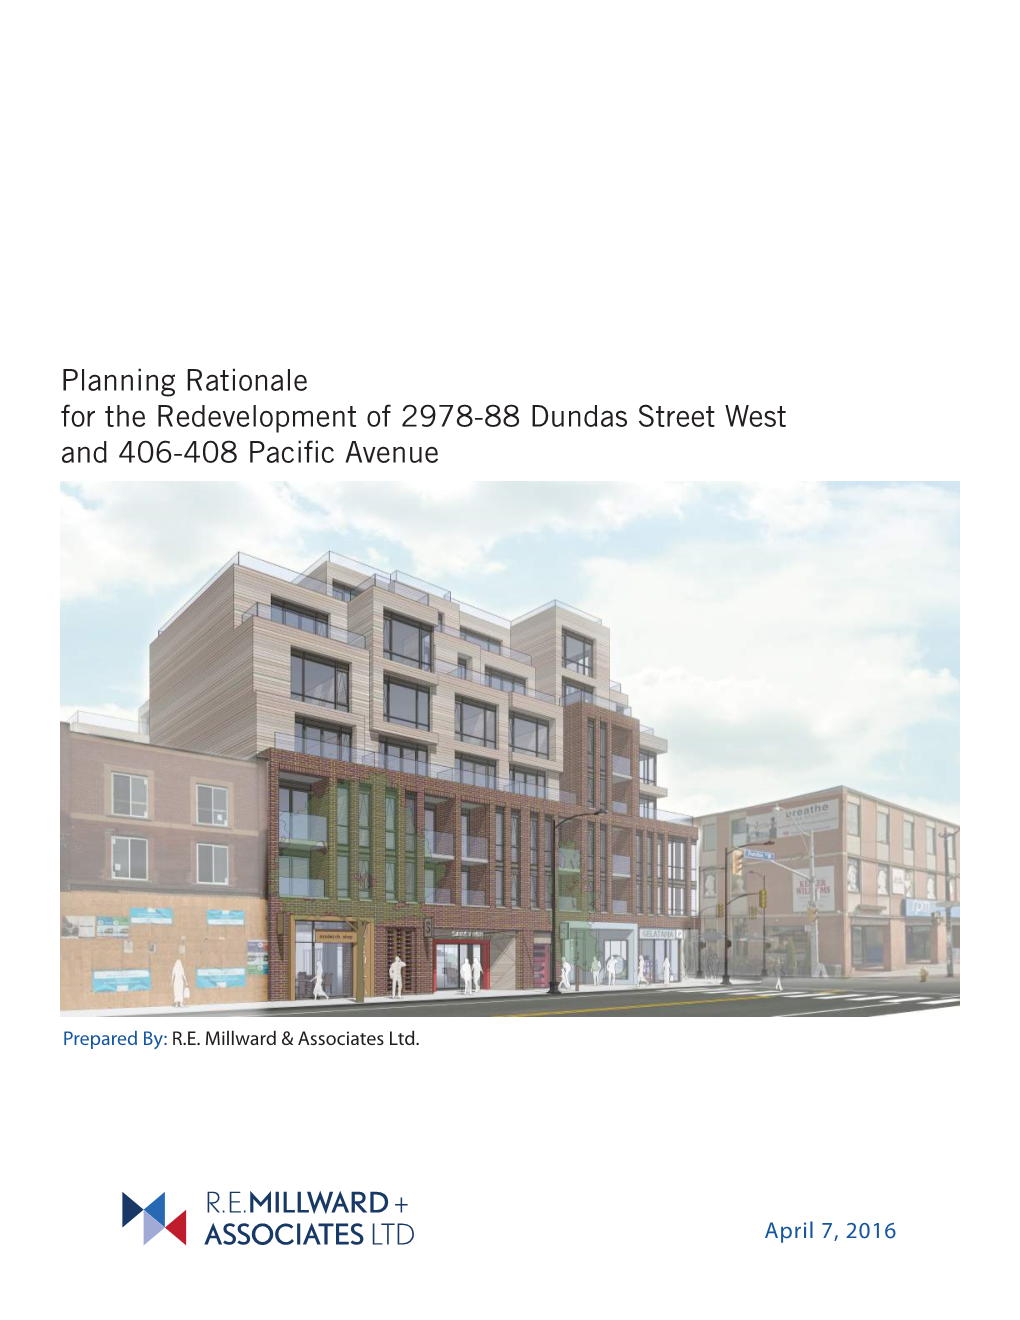 Planning Rationale for the Redevelopment of 2978-88 Dundas Street West and 406-408 Pacific Avenue